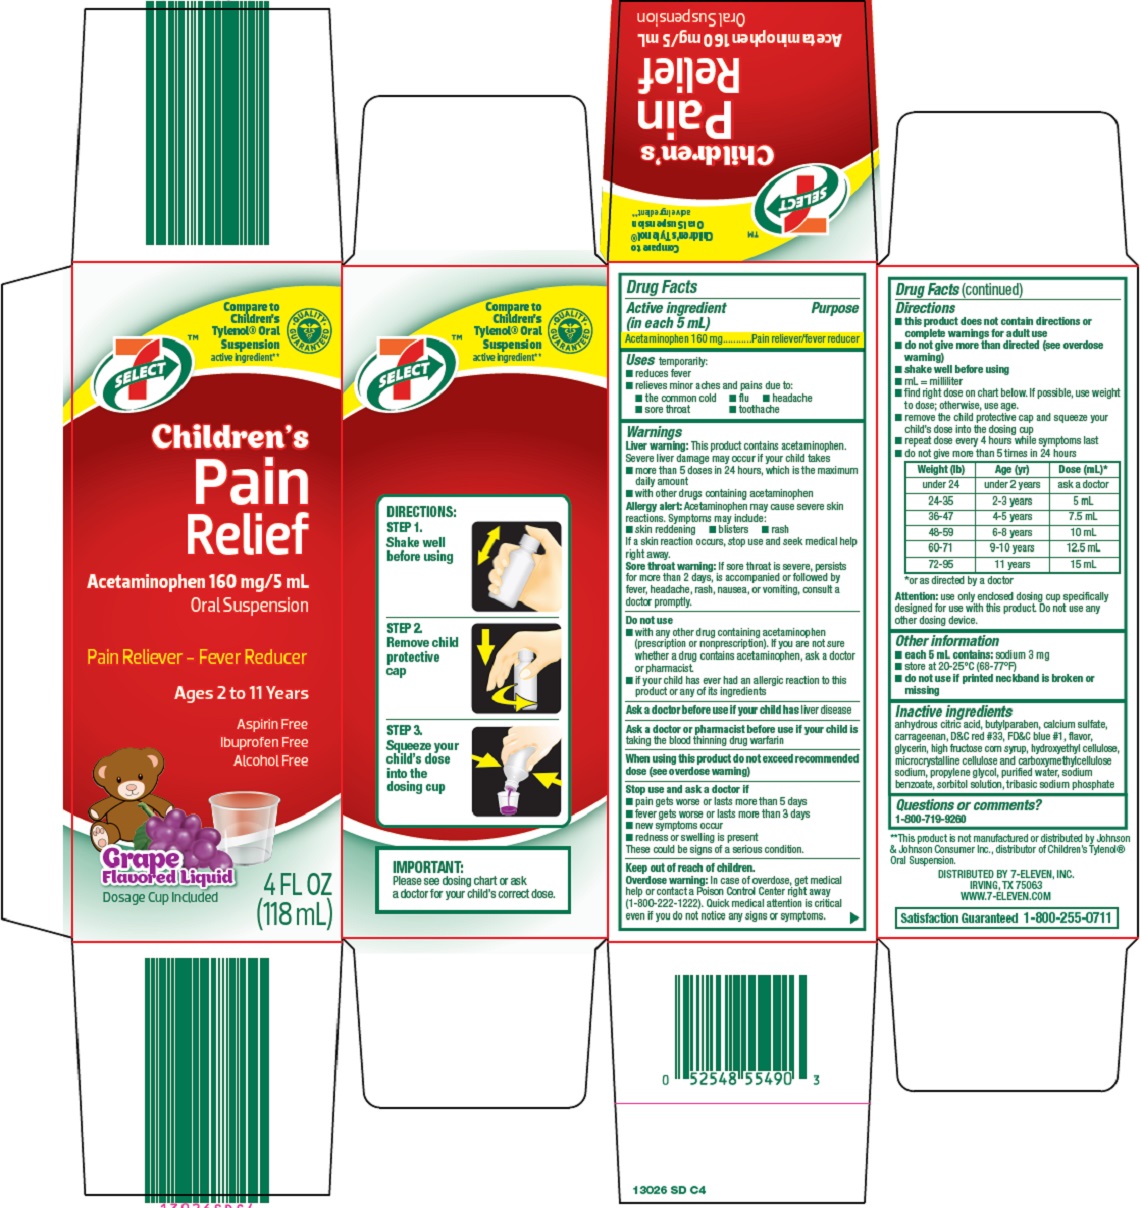 childrens-pain-relief-image